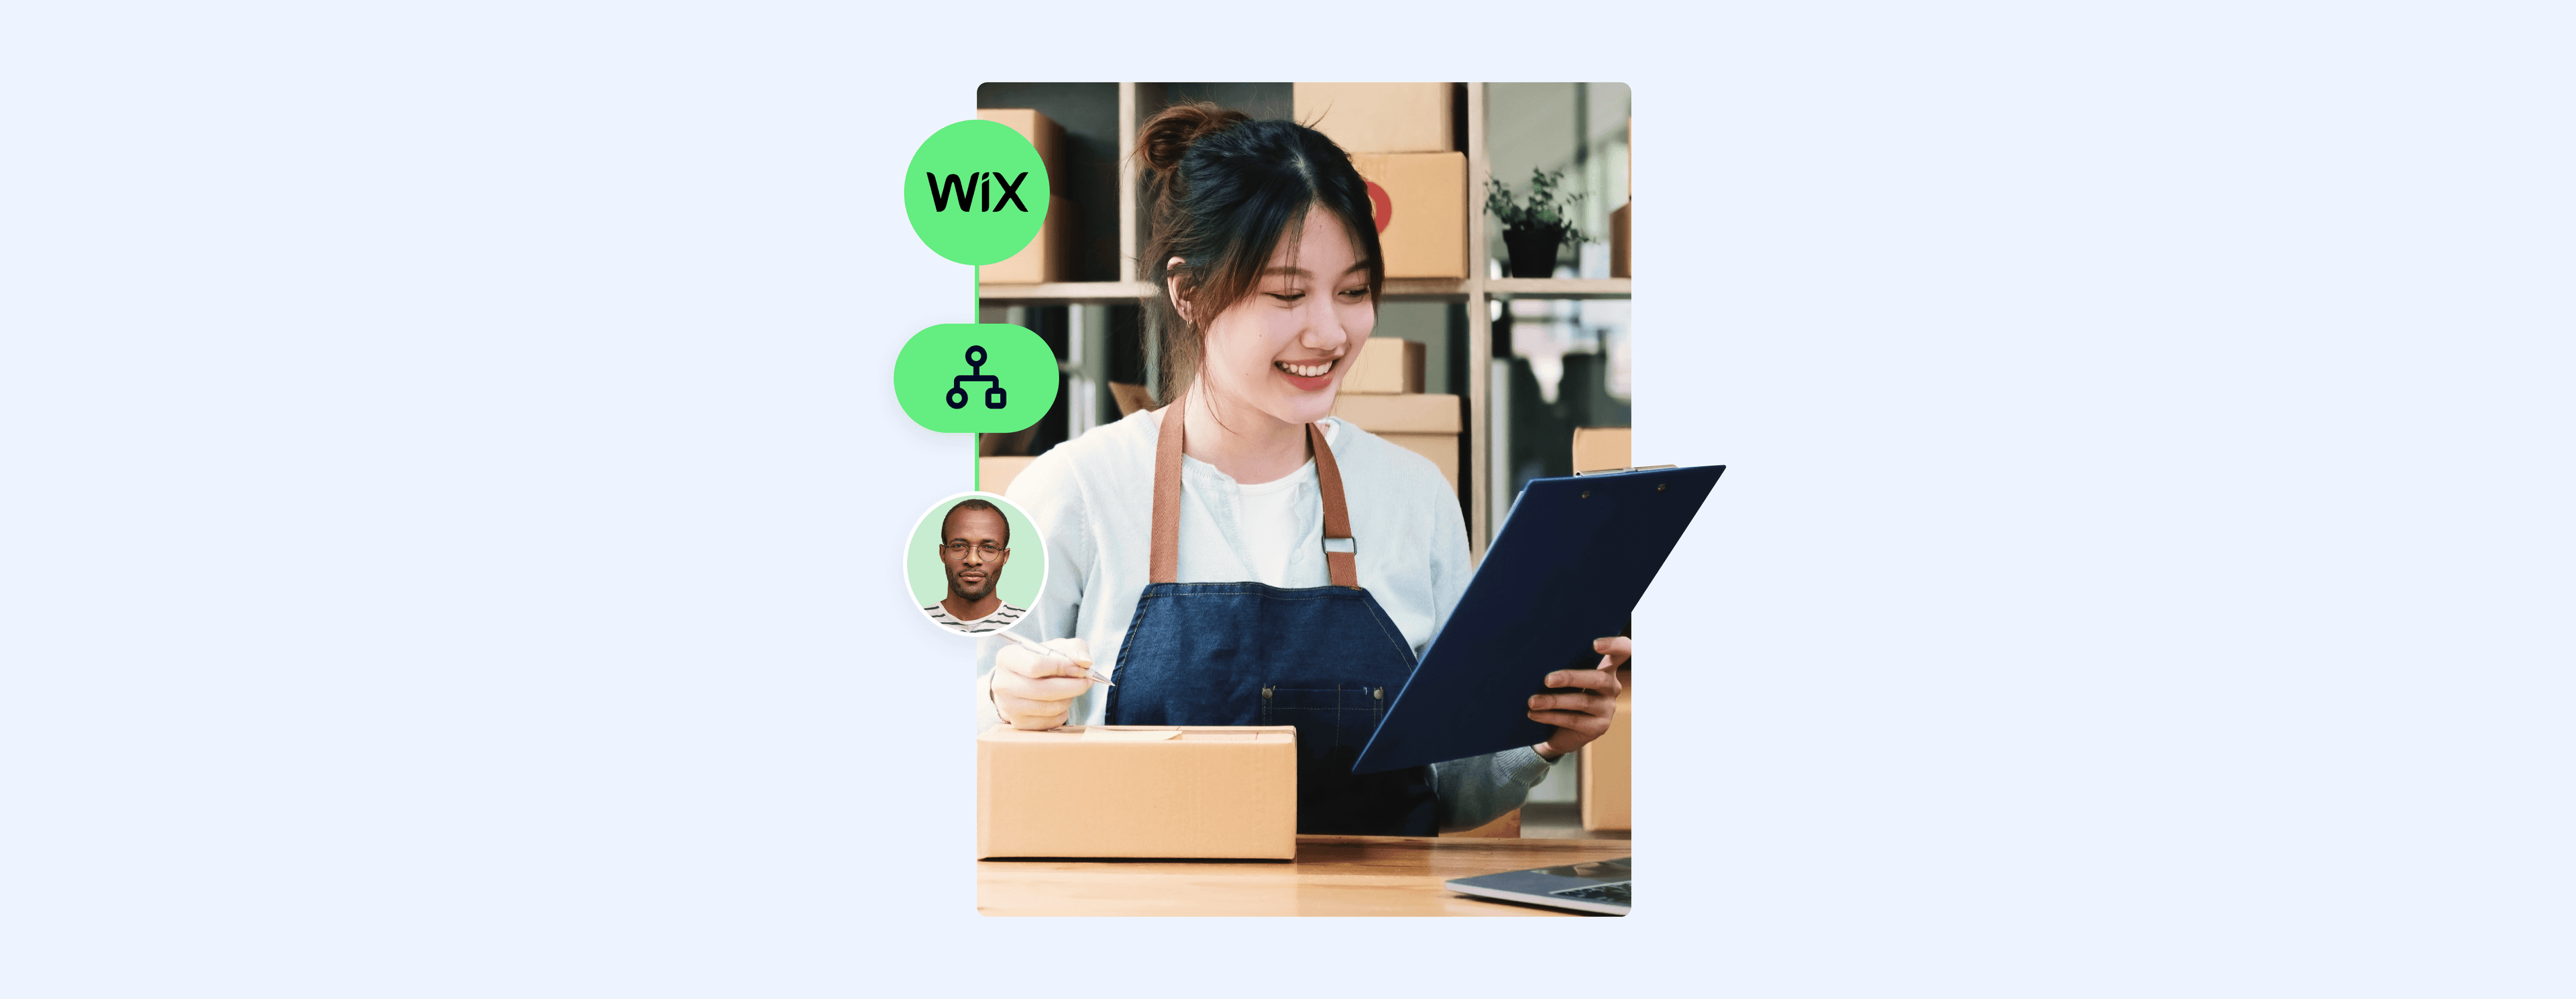 wix chatbot cover image